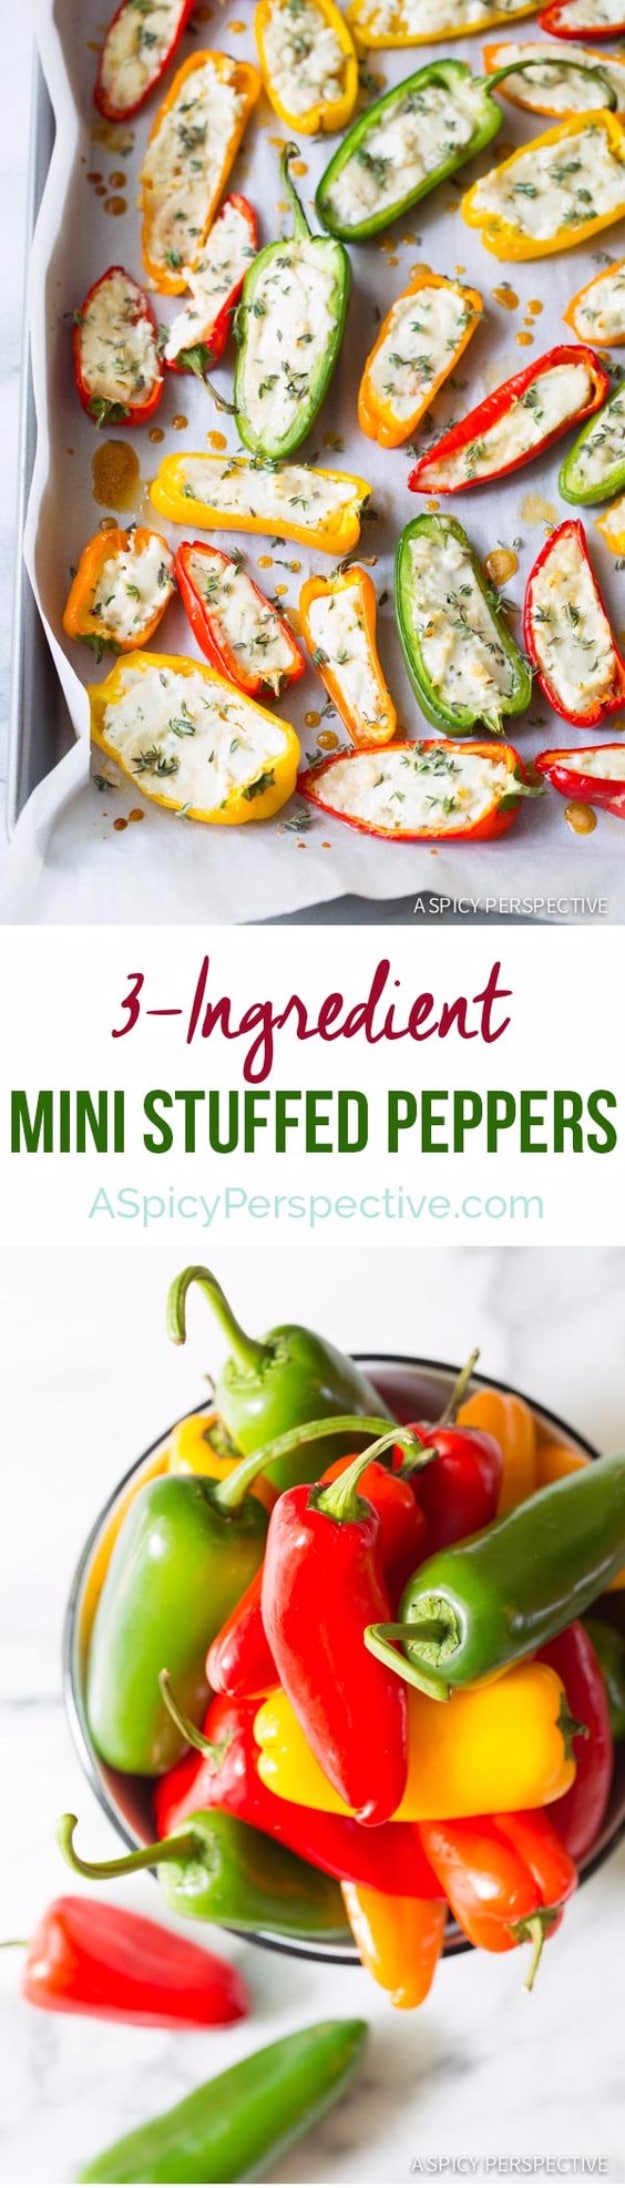 33 Easy Three Ingredient Recipes - 3 Ingredient Mini Stuffed Peppers - Quick And Healthy 3 Ingredients Recipe Ideas for Breakfast, Lunch, Dinner, Appetizers, Snacks and Desserts - Cookies, Chicken, Crockpot Ideas, Baking and Microwave Recipes and Tutorials #easyrecipes #quickrecipes